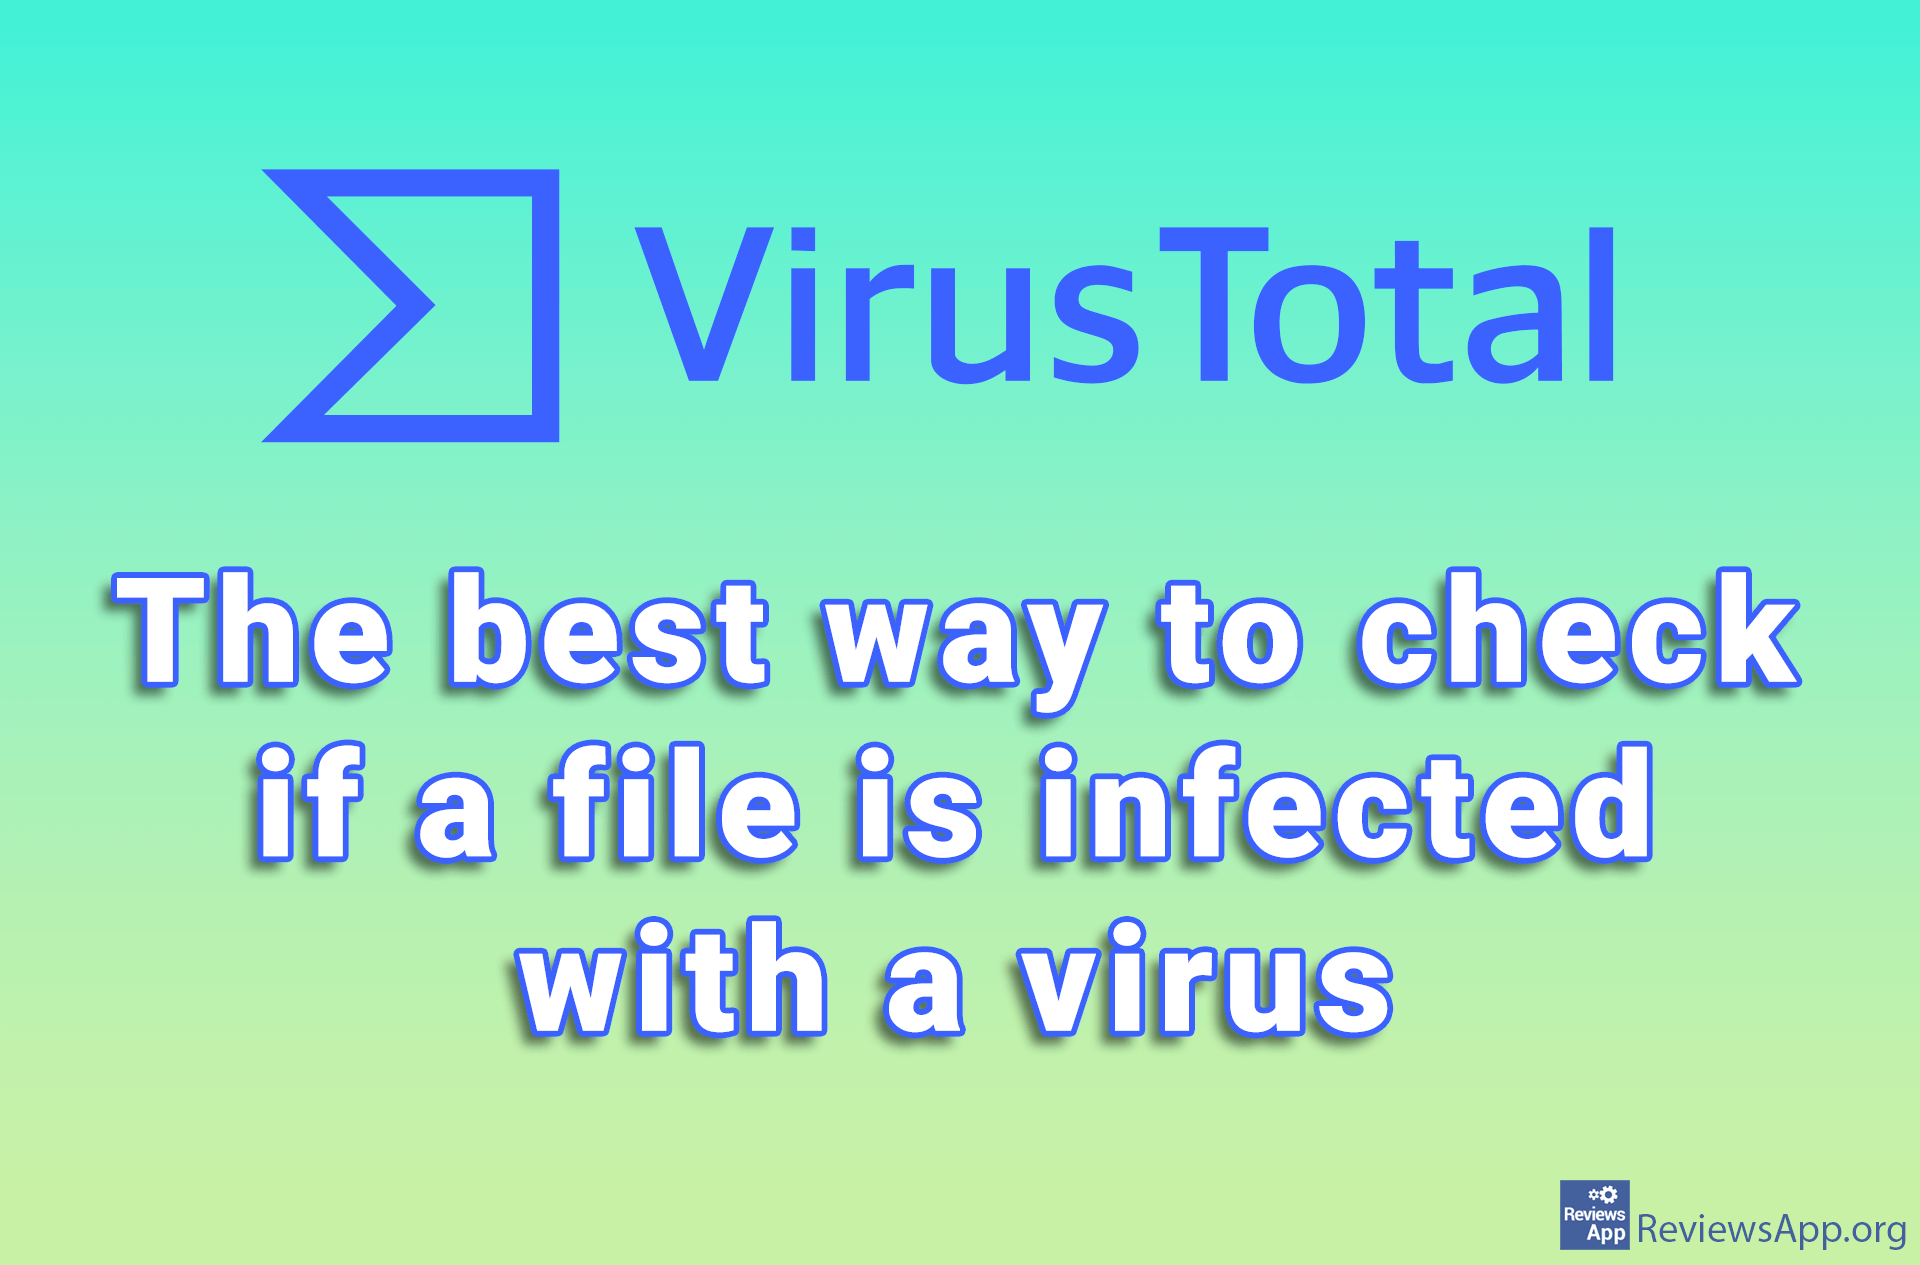 VirusTotal – the best way to check if a file is infected with a virus